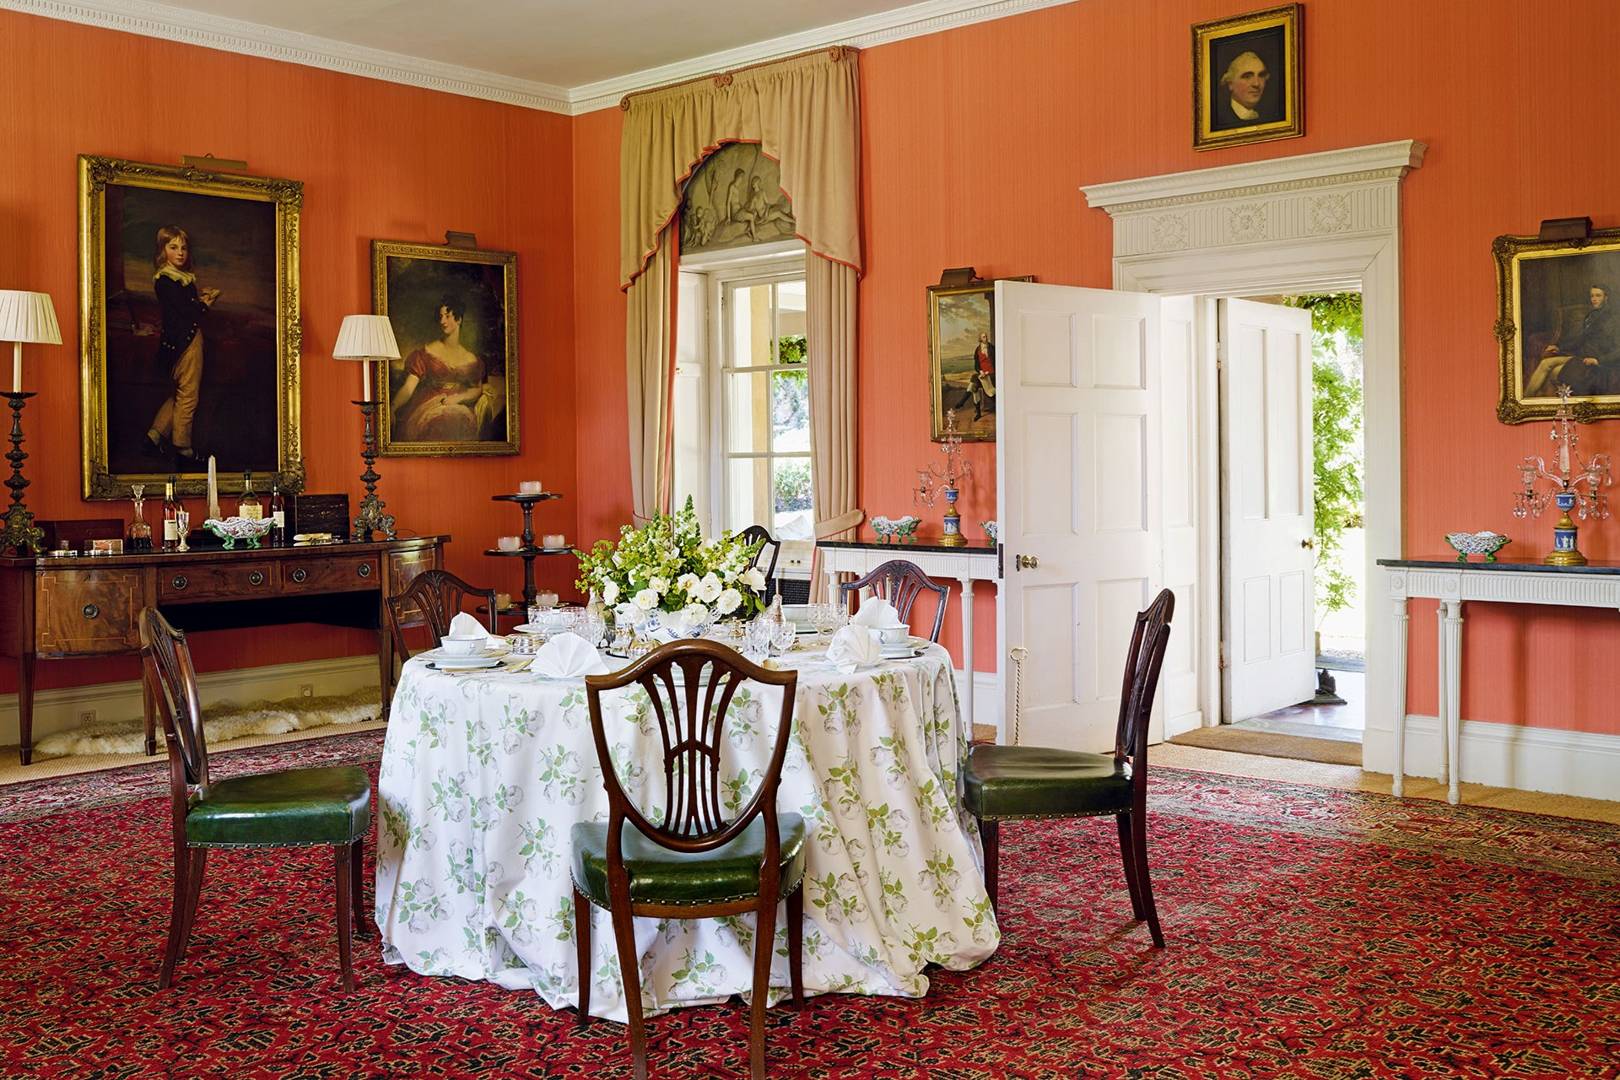 English Country House Style Its History And How To Get The